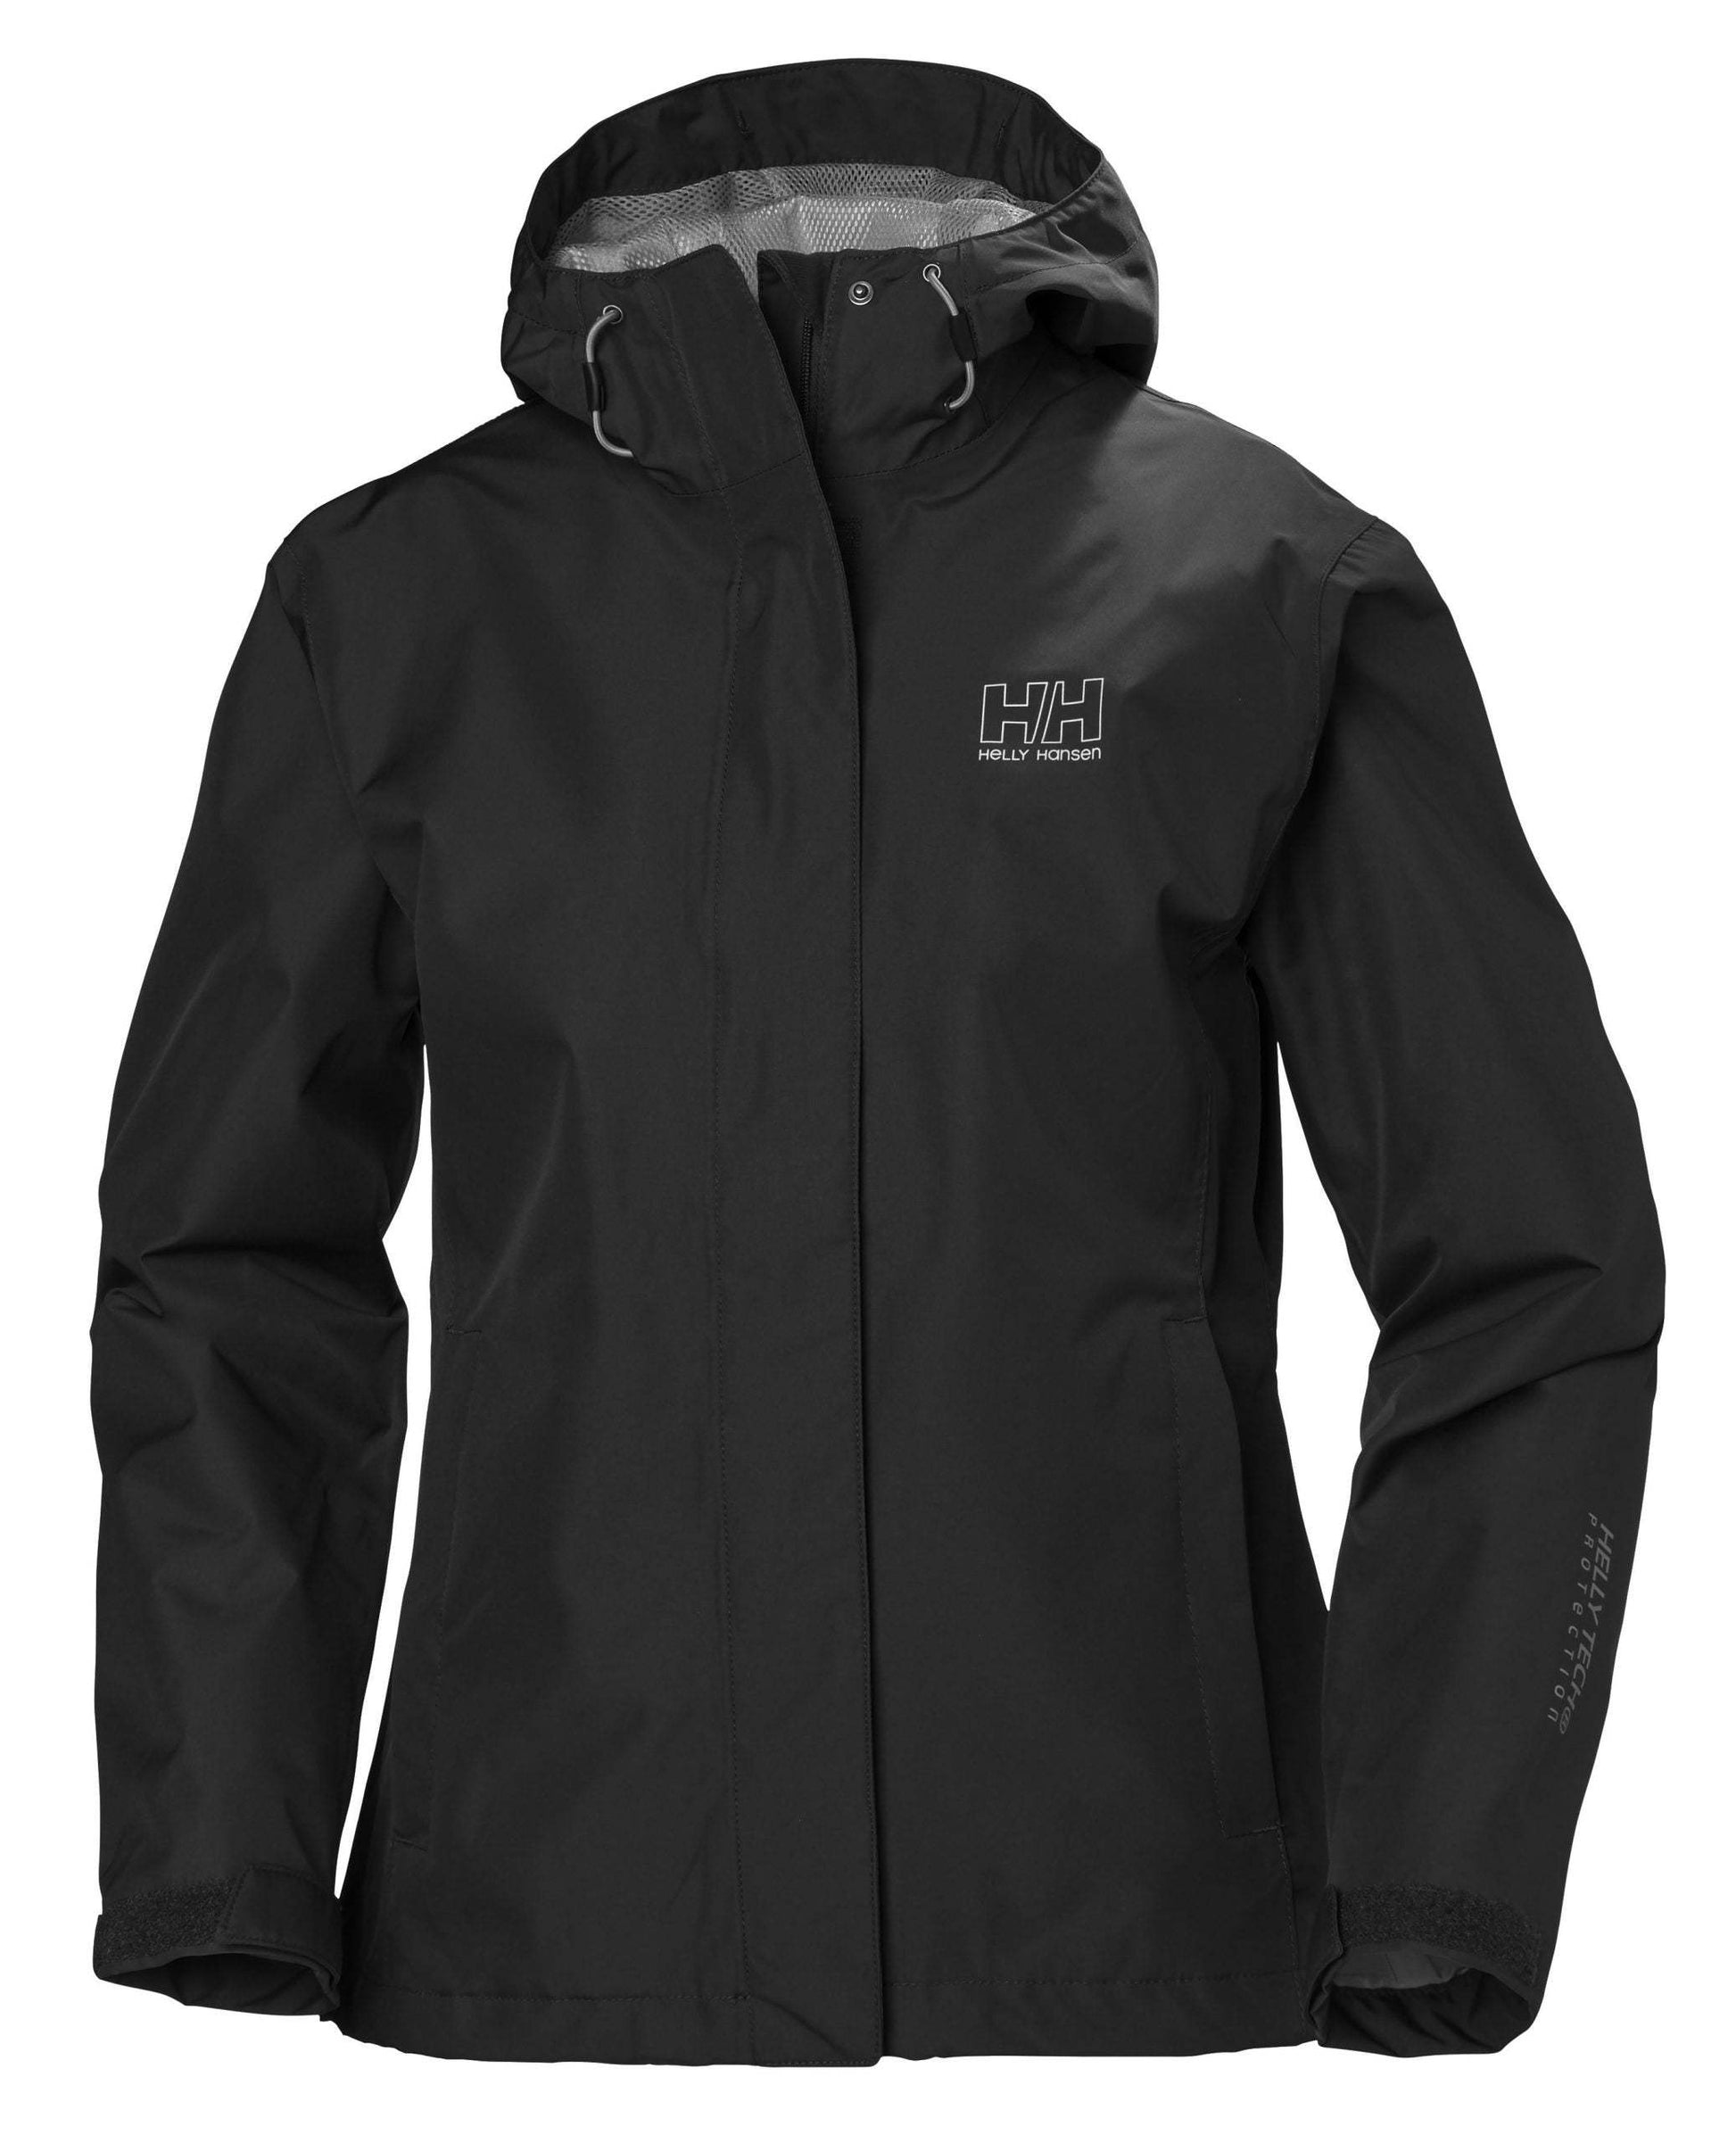 Womens Seven J Jacket by Helly Hansen - The Luxury Promotional Gifts Company Limited